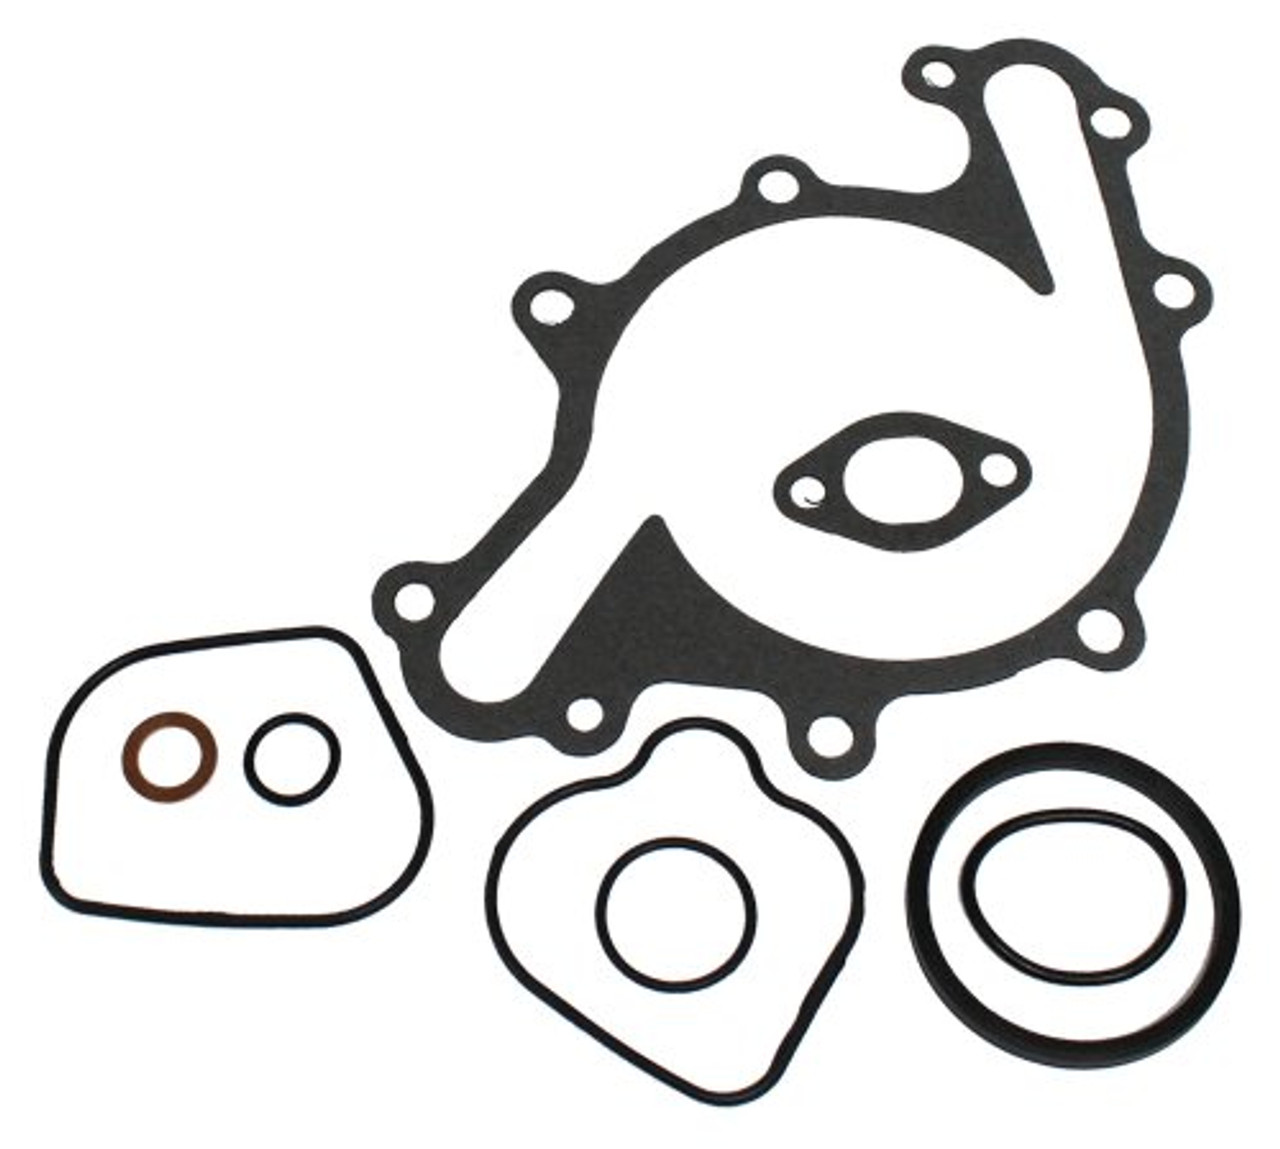 Lower Gasket Set - 1994 Lincoln Continental 3.8L Engine Parts # LGS4122ZE17